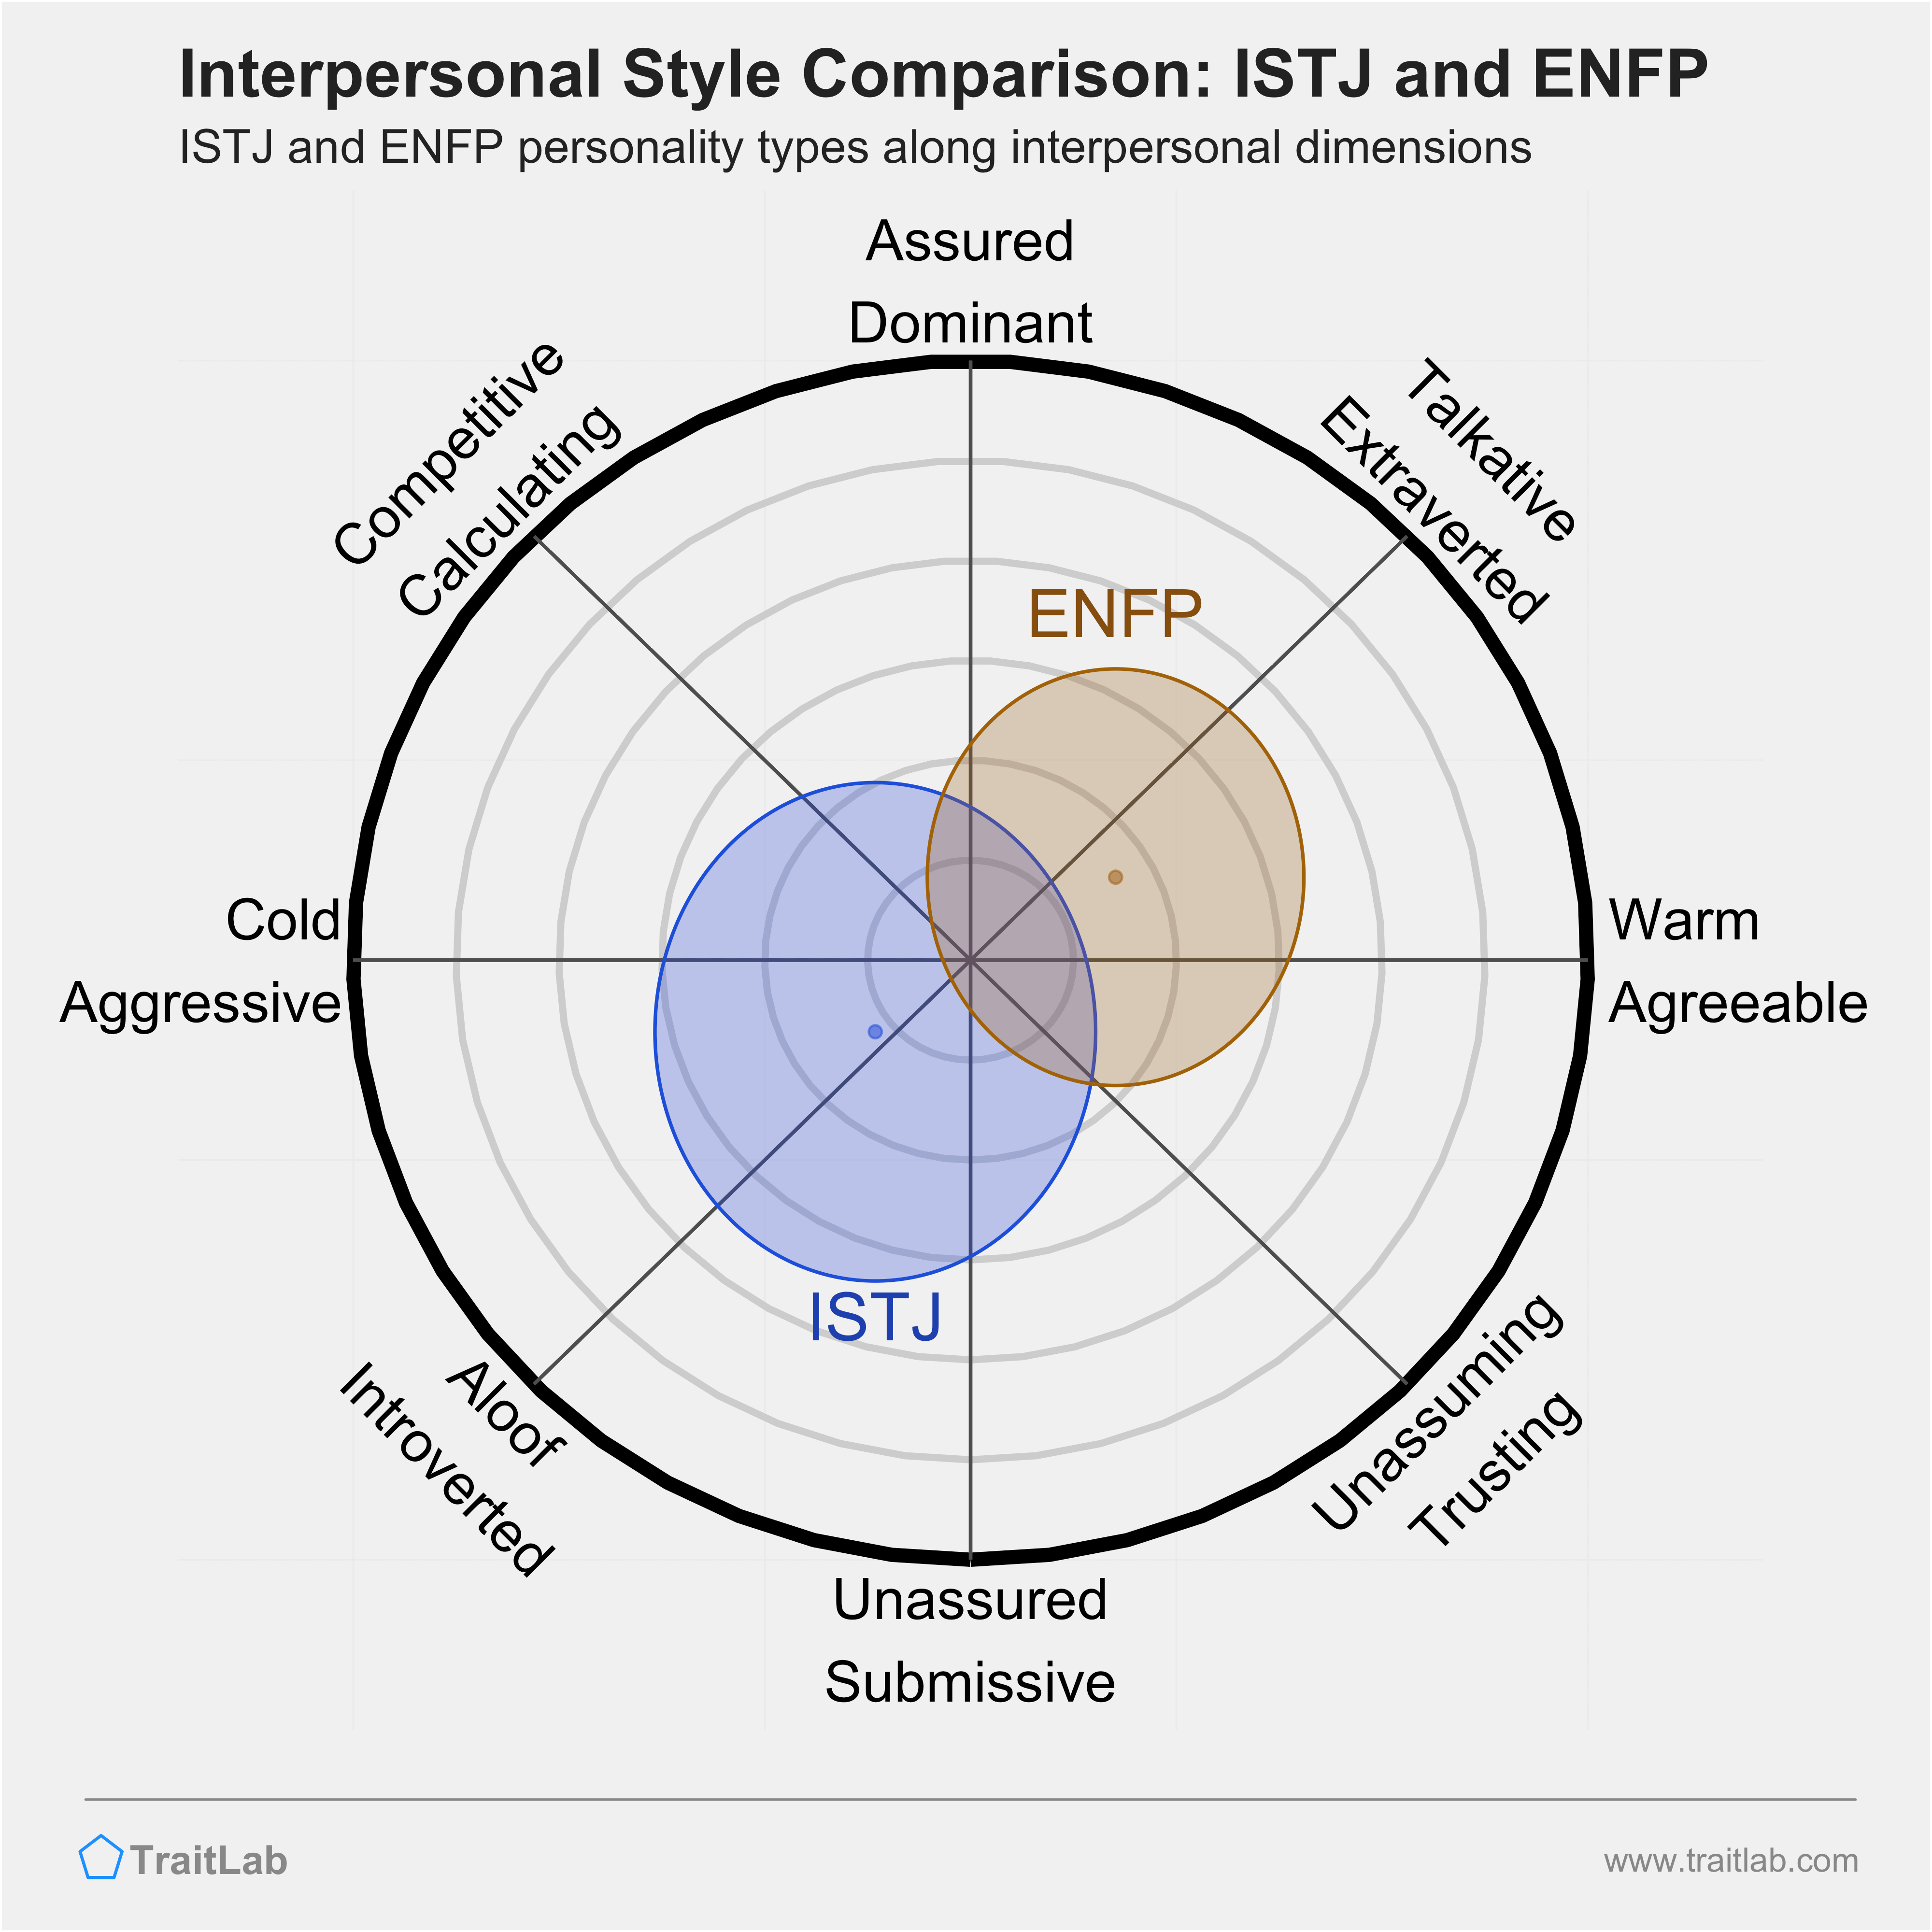 ISTJ and ENFP comparison across interpersonal dimensions